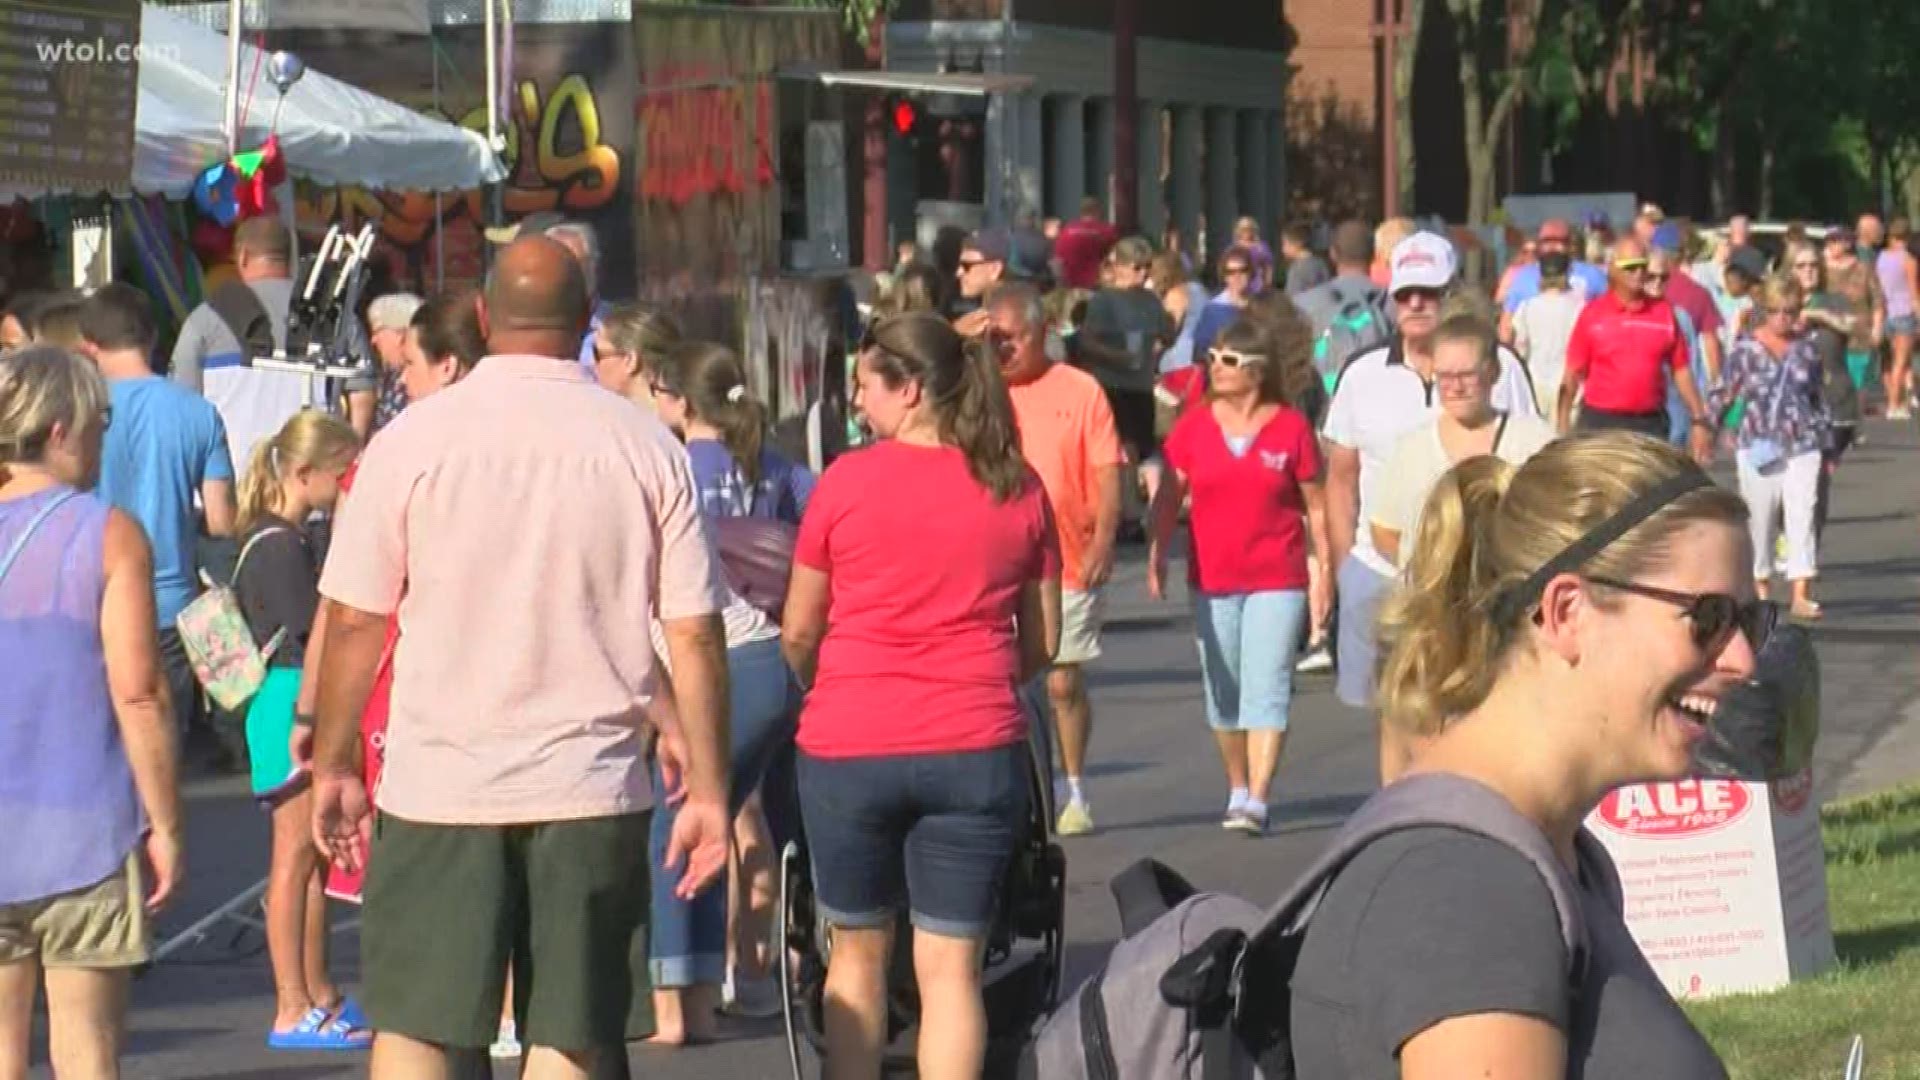 Hundreds gathered for the first day of the Maumee Summer Fair and got in line for the chance to have a "Taste of Maumee"